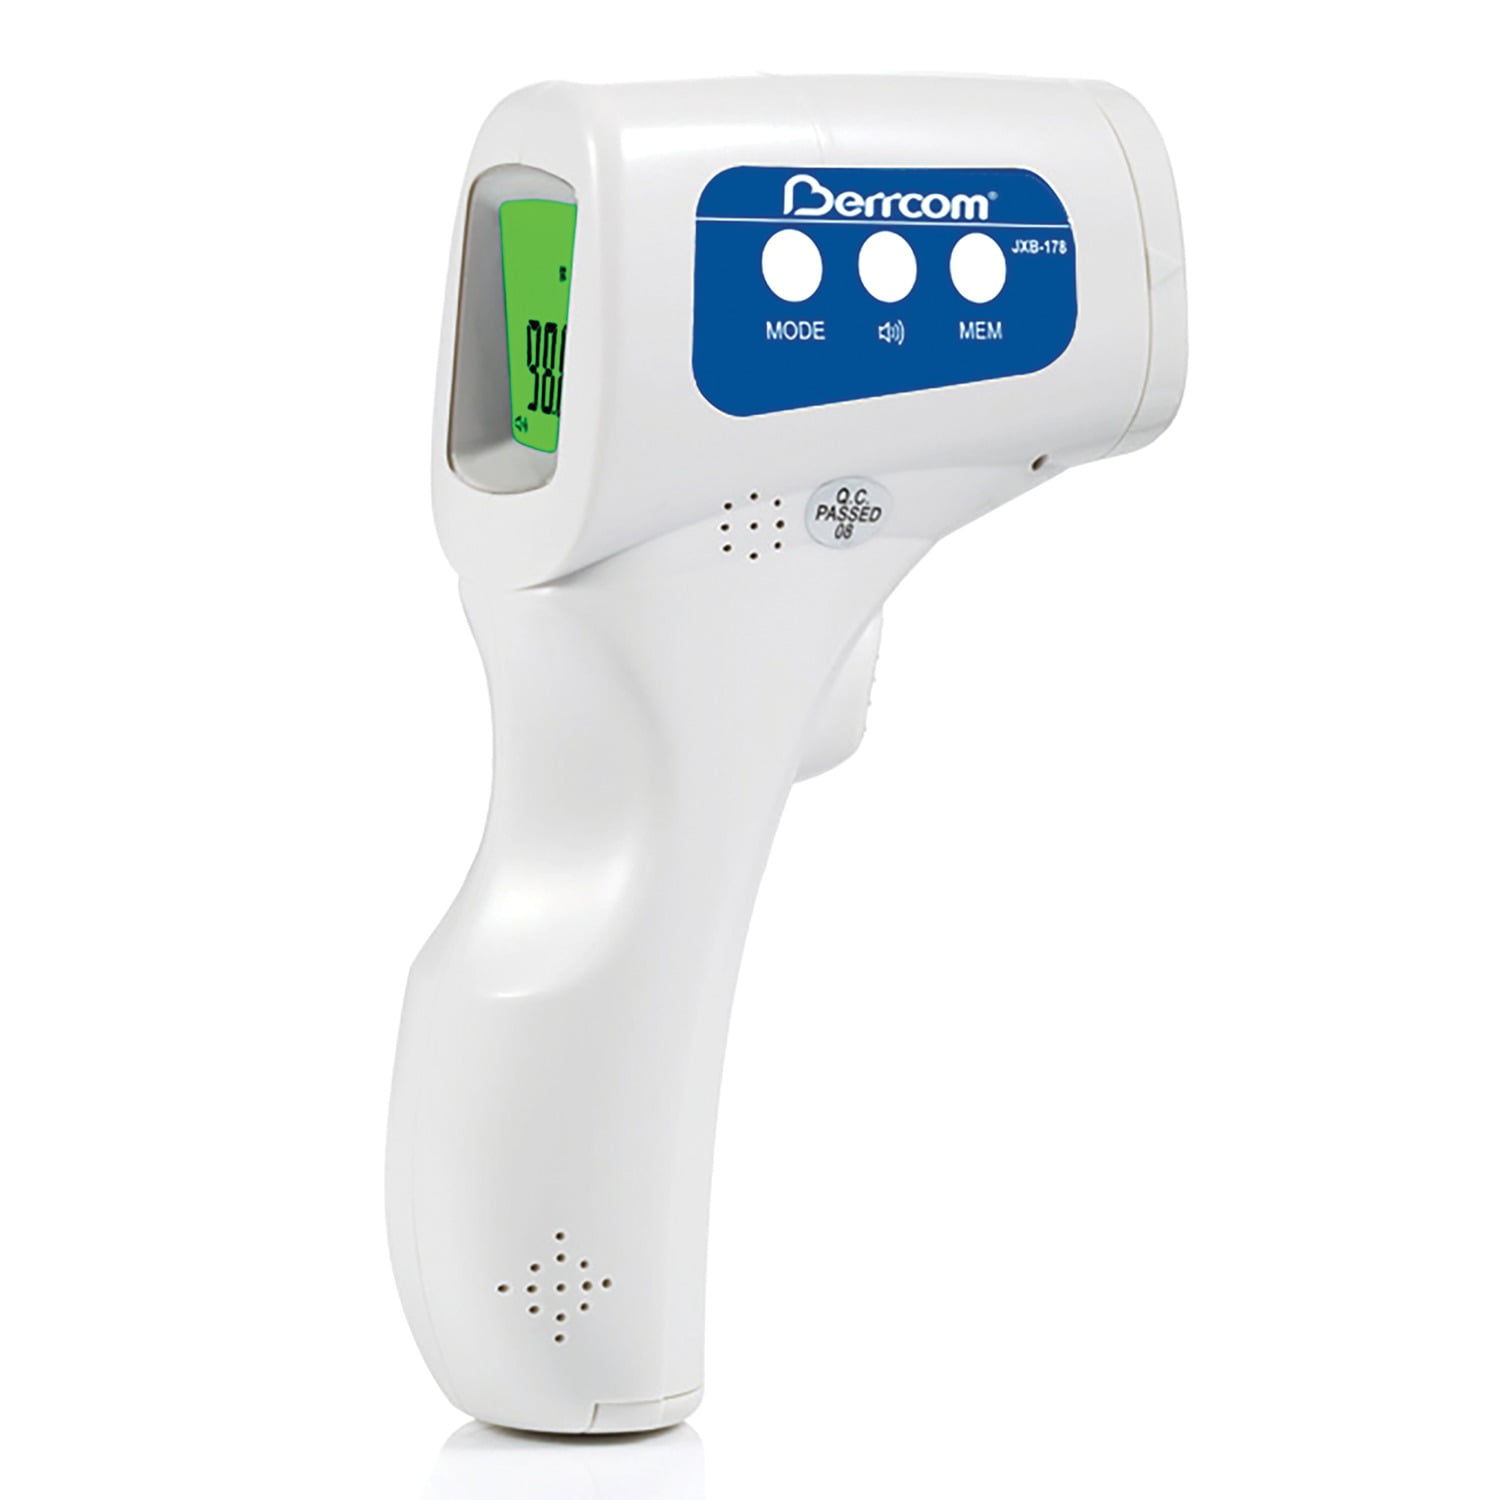 MEDICAL Digital LCD Infrared Thermometer Non-contact Forehead Baby Adult # PC86 